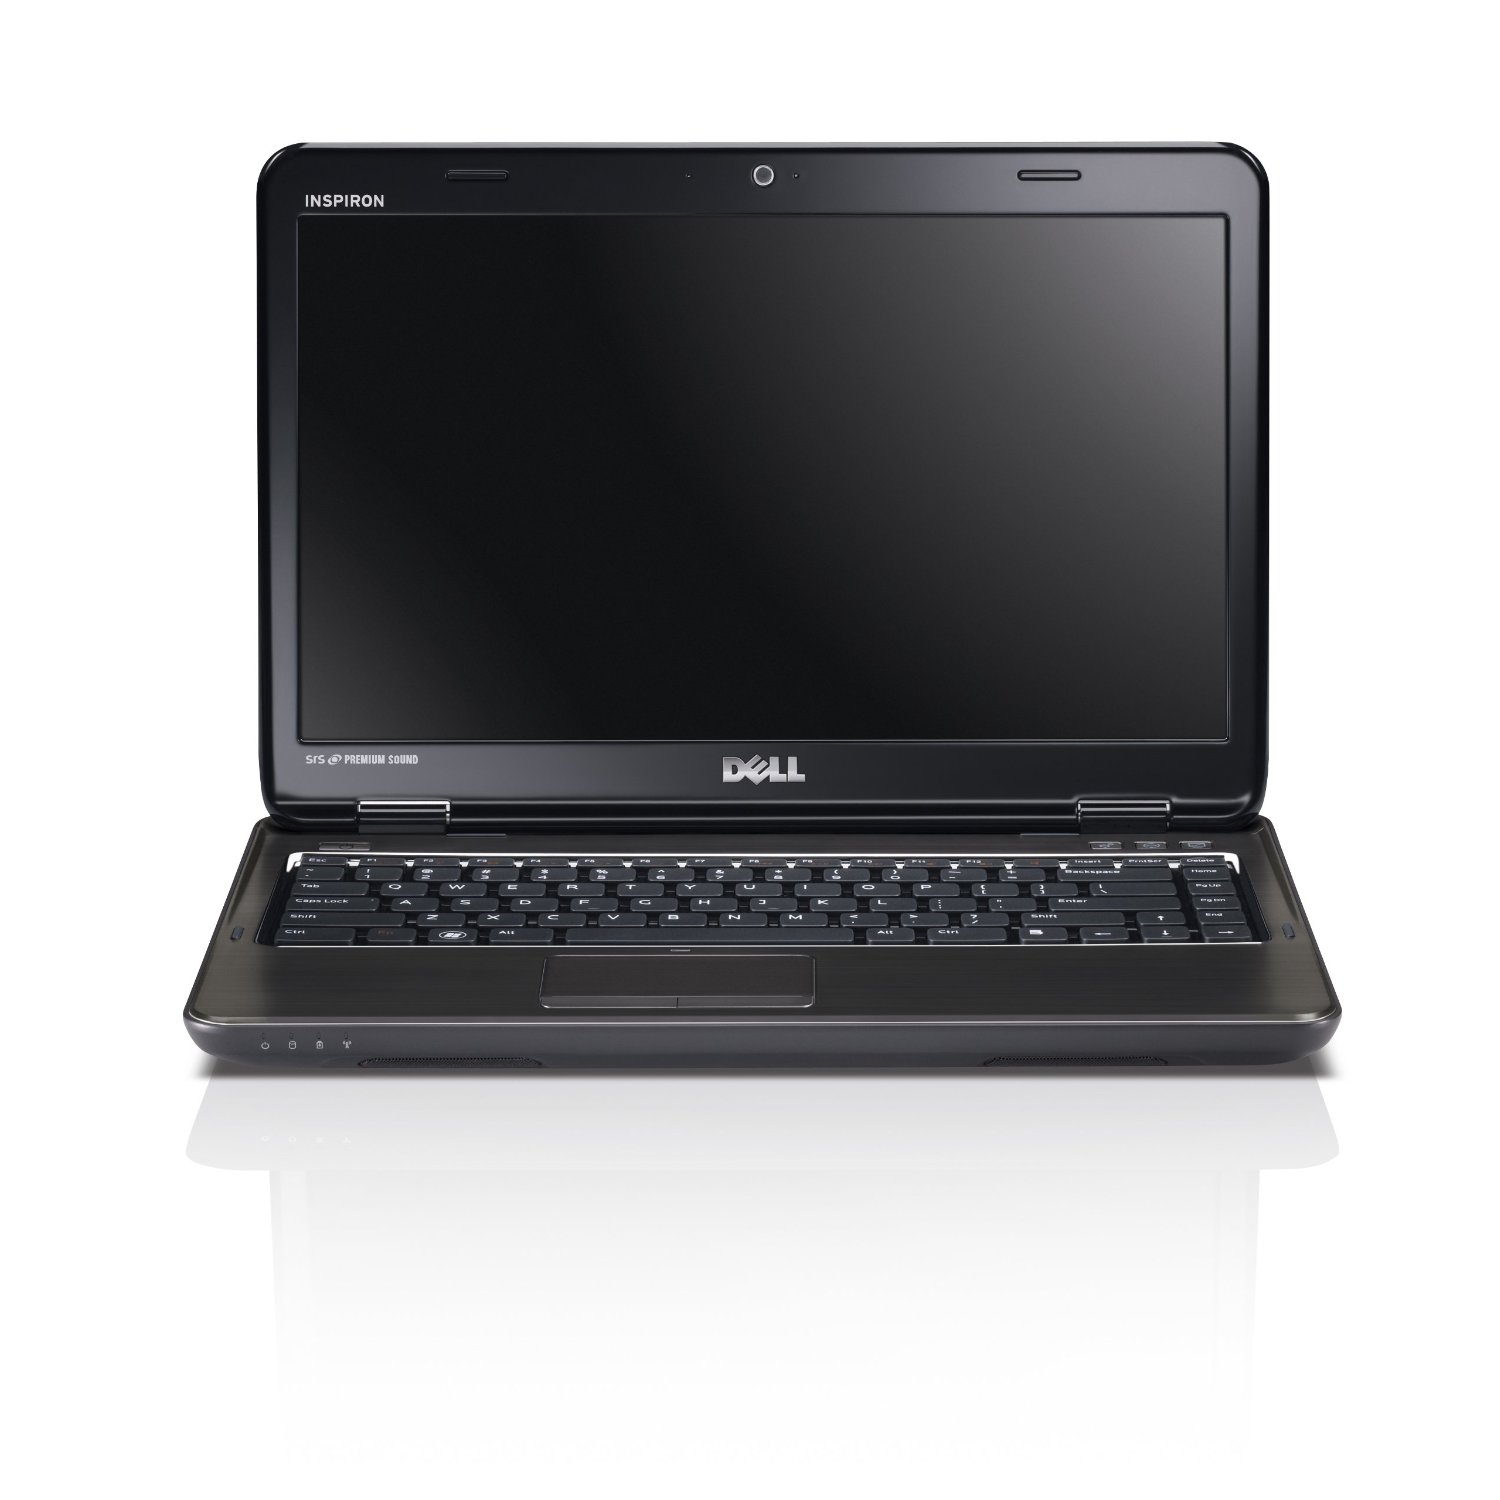 http://thetechjournal.com/wp-content/uploads/images/1111/1320857776-dell-inspiron-i14rn1364dbk-14inch-laptop-8.jpg